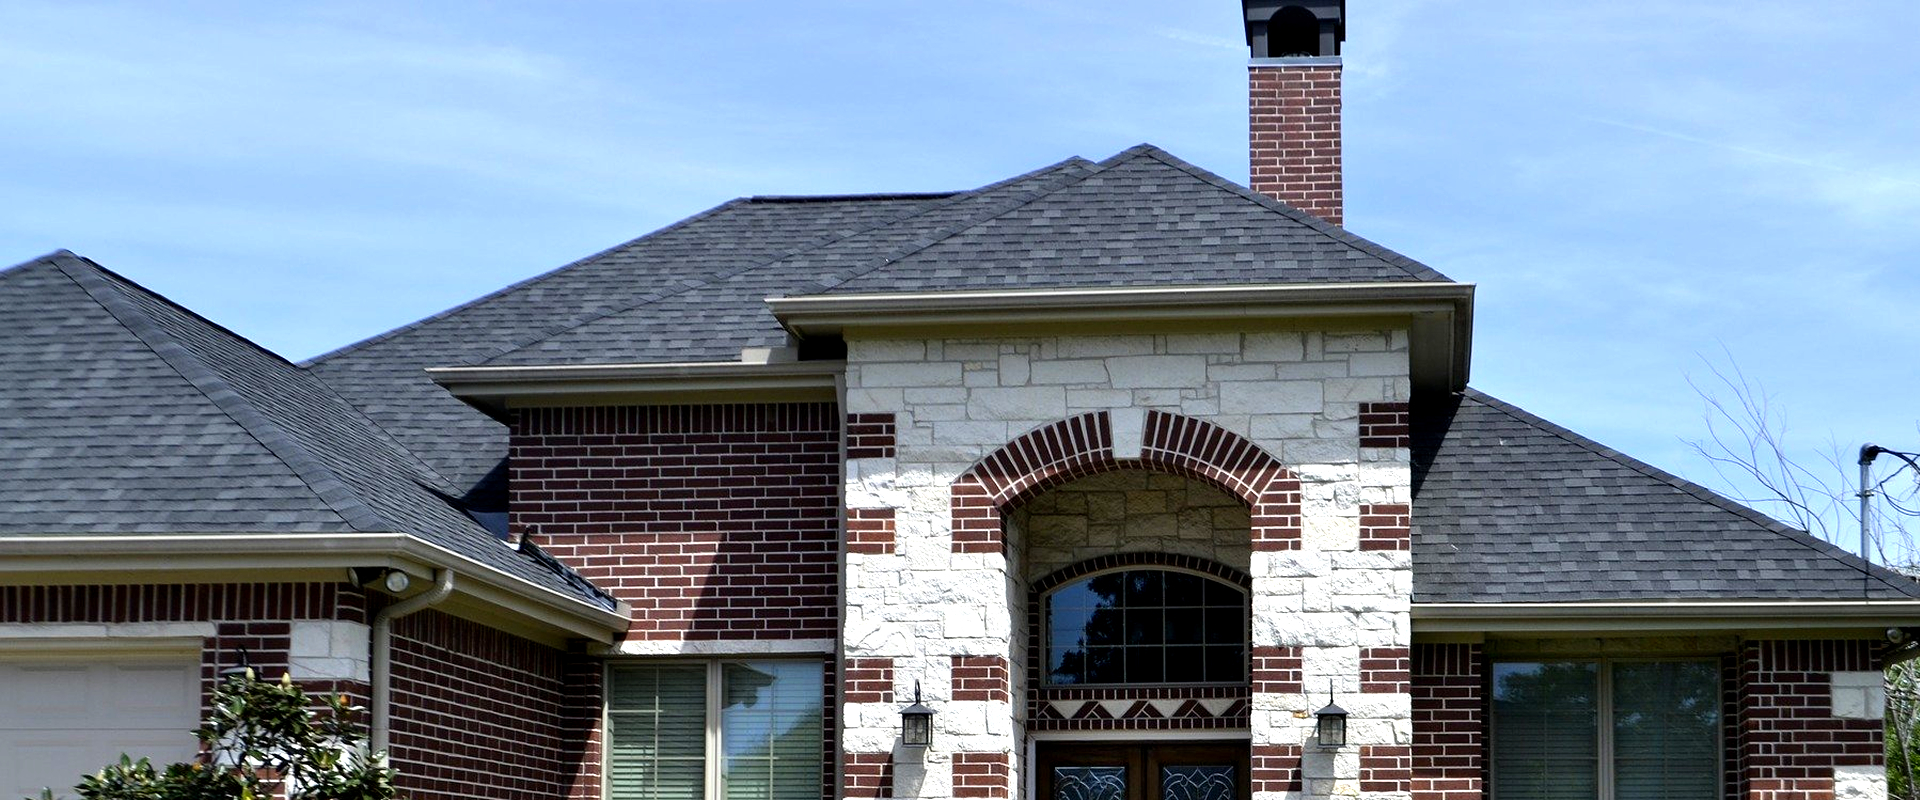 Redline Contractings roofing services use quality materials and the best methods to install or repair roofing for our clients in the greater Twin Cities area.